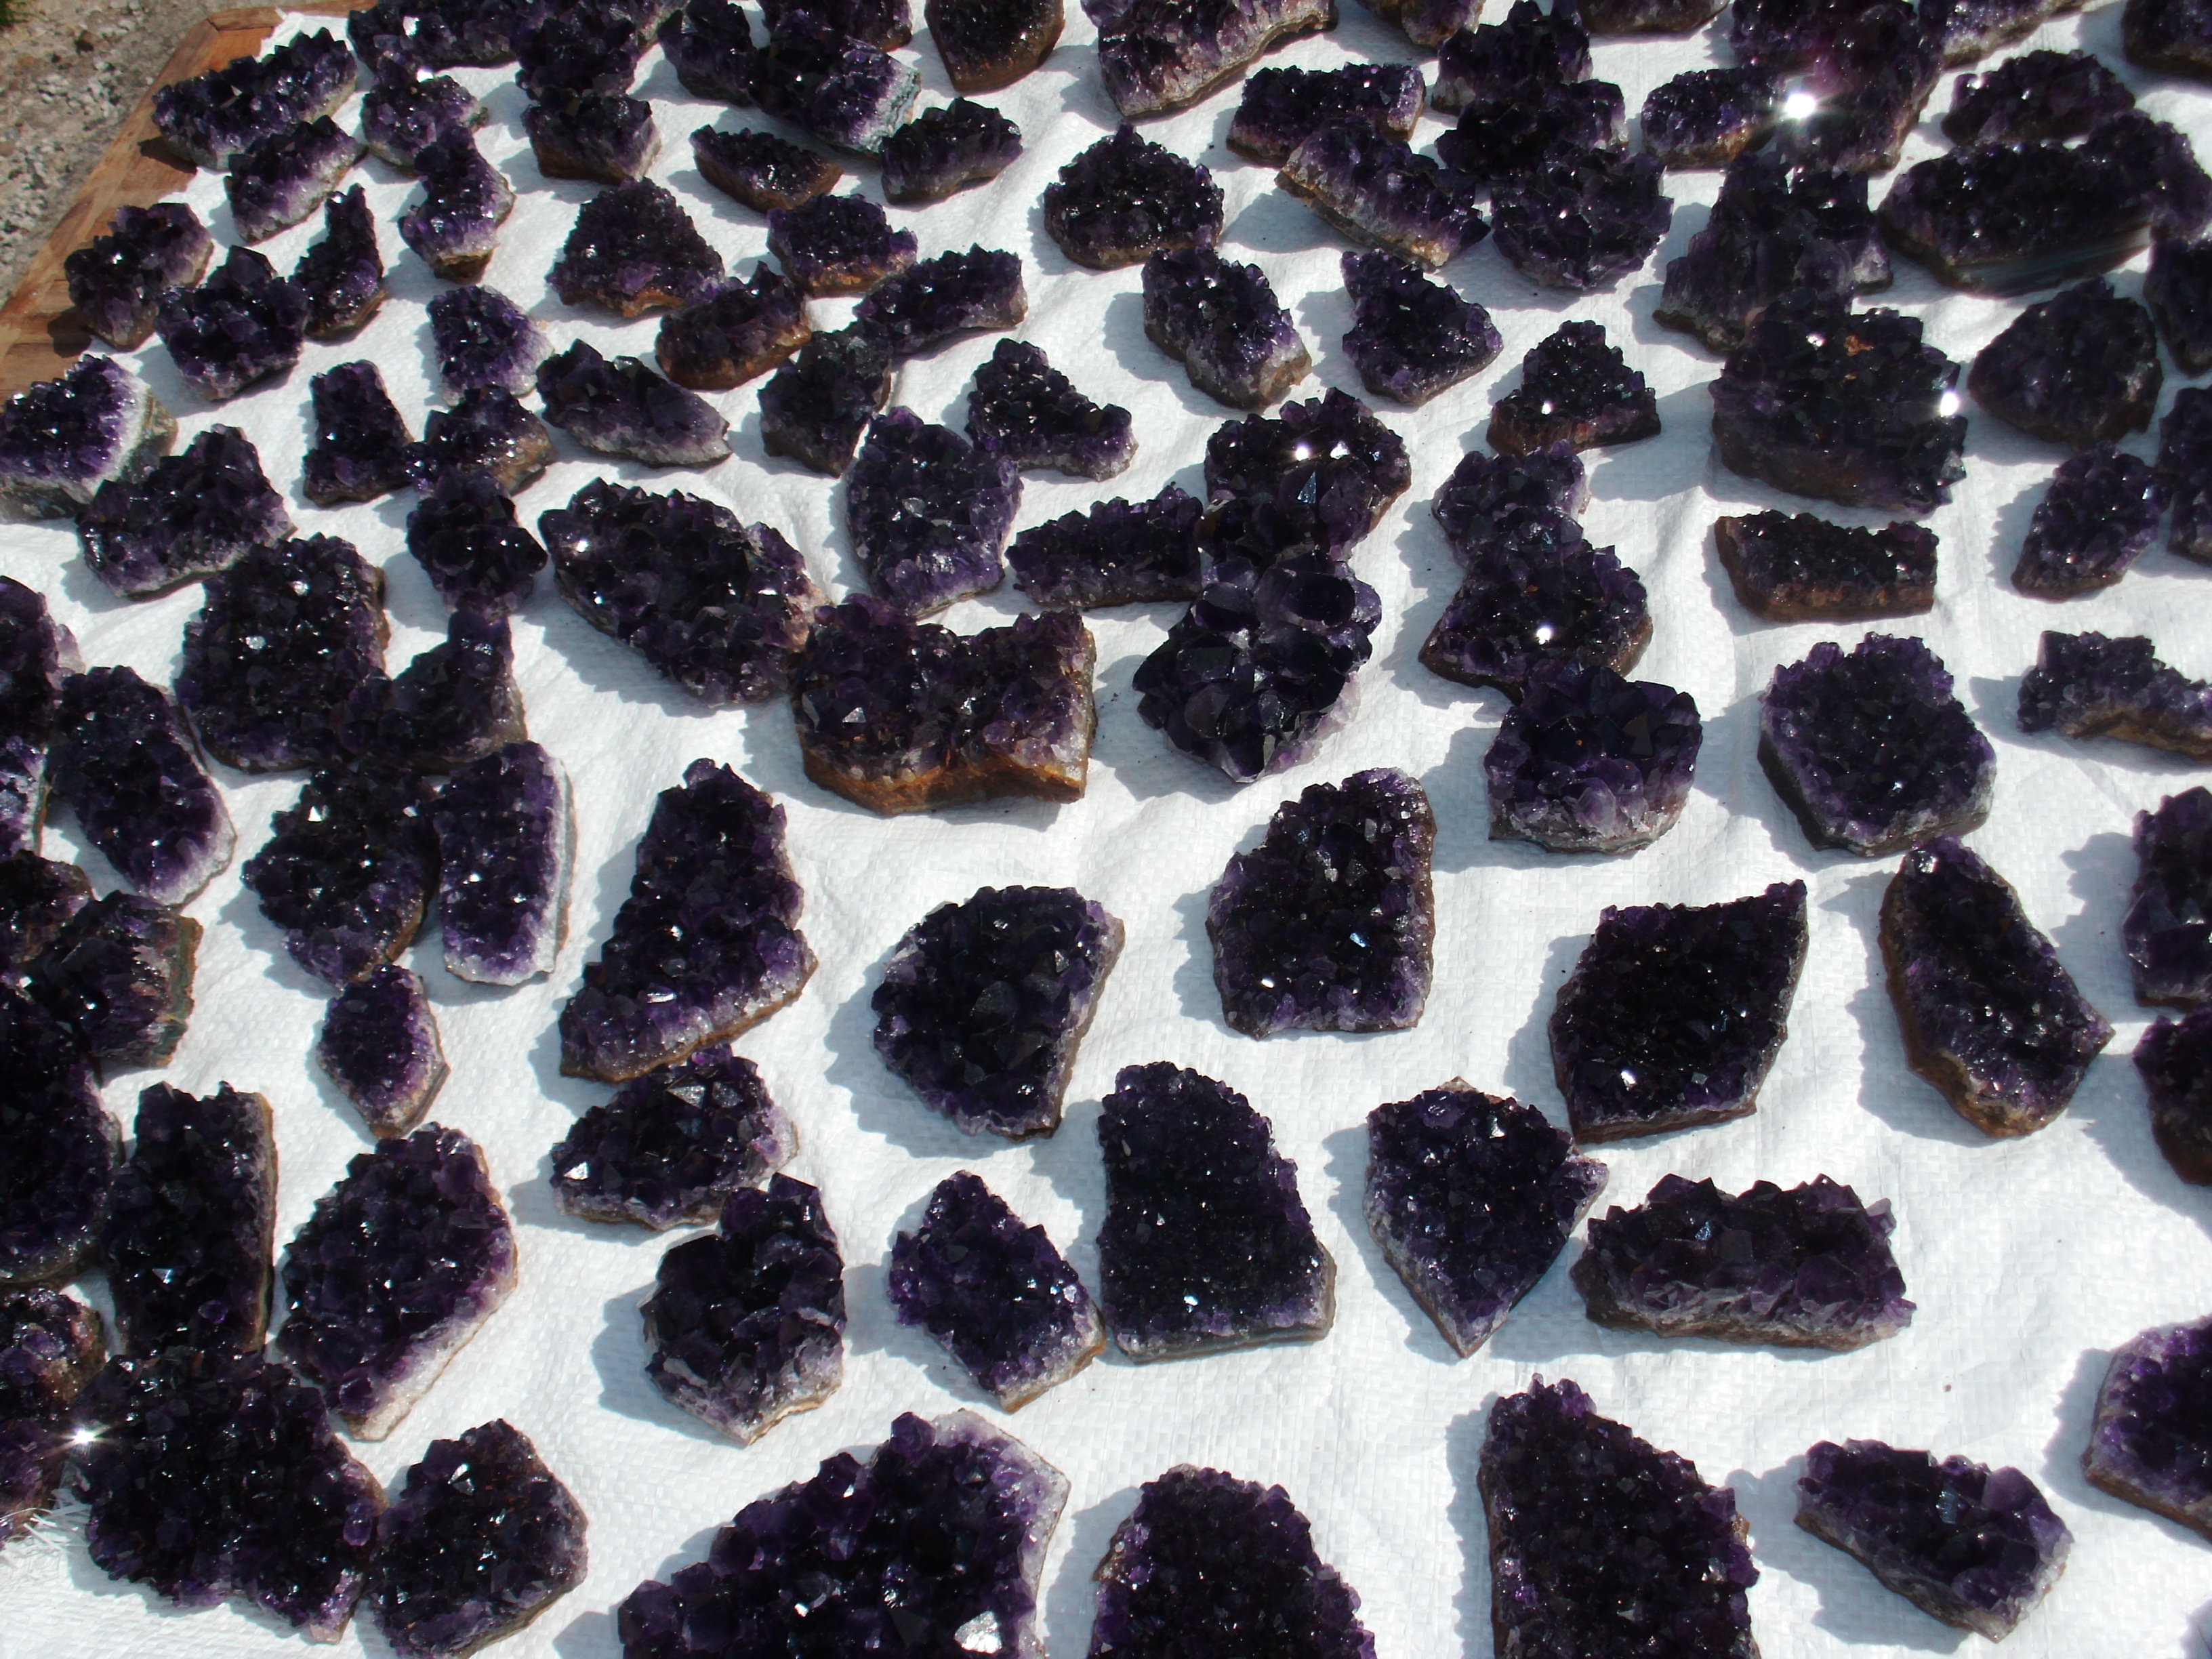 Stones from Uruguay - Uruguayan Amethyst Clusters from 0.040kg to 1.5kg